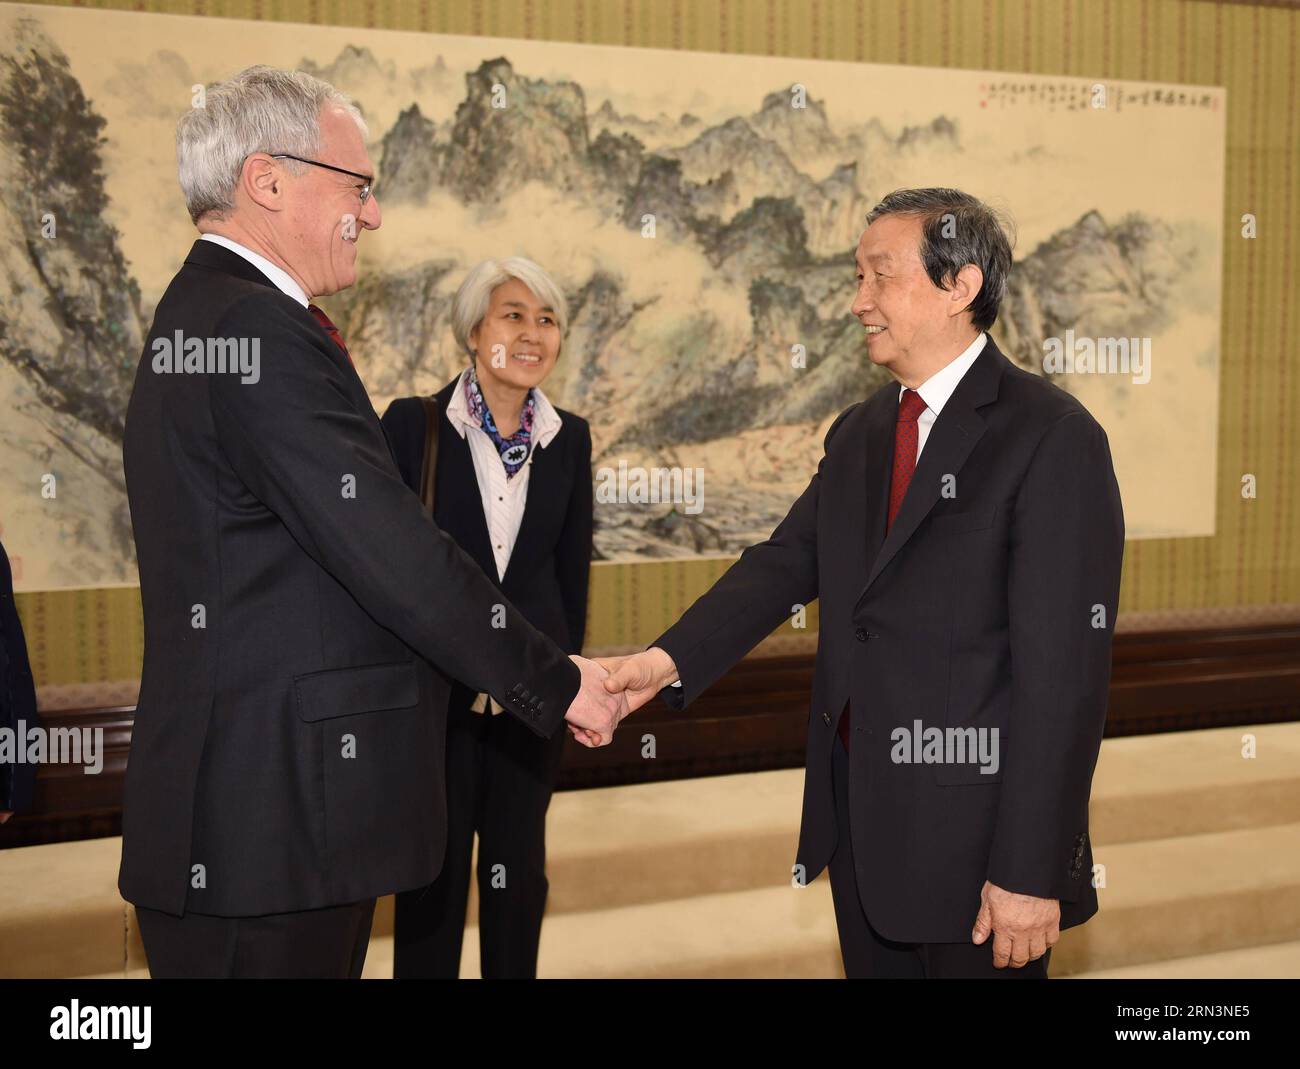 (150423) -- BEIJING, April 23, 2015 -- Chinese Vice Premier Ma Kai (R) meets with Jean-Bernard Levy, CEO of France s electricity giant Electricite de France (EDF), in Beijing, capital of China, on April 23, 2015. ) CHINA-BEIJING-MA KAI-FRANCE-MEETING (CN) GaoxJie PUBLICATIONxNOTxINxCHN   Beijing April 23 2015 Chinese Vice Premier MA Kai r Meets With Jean Bernard Levy CEO of France S Electricity Giant Electricite de France EdF in Beijing Capital of China ON April 23 2015 China Beijing MA Kai France Meeting CN  PUBLICATIONxNOTxINxCHN Stock Photo